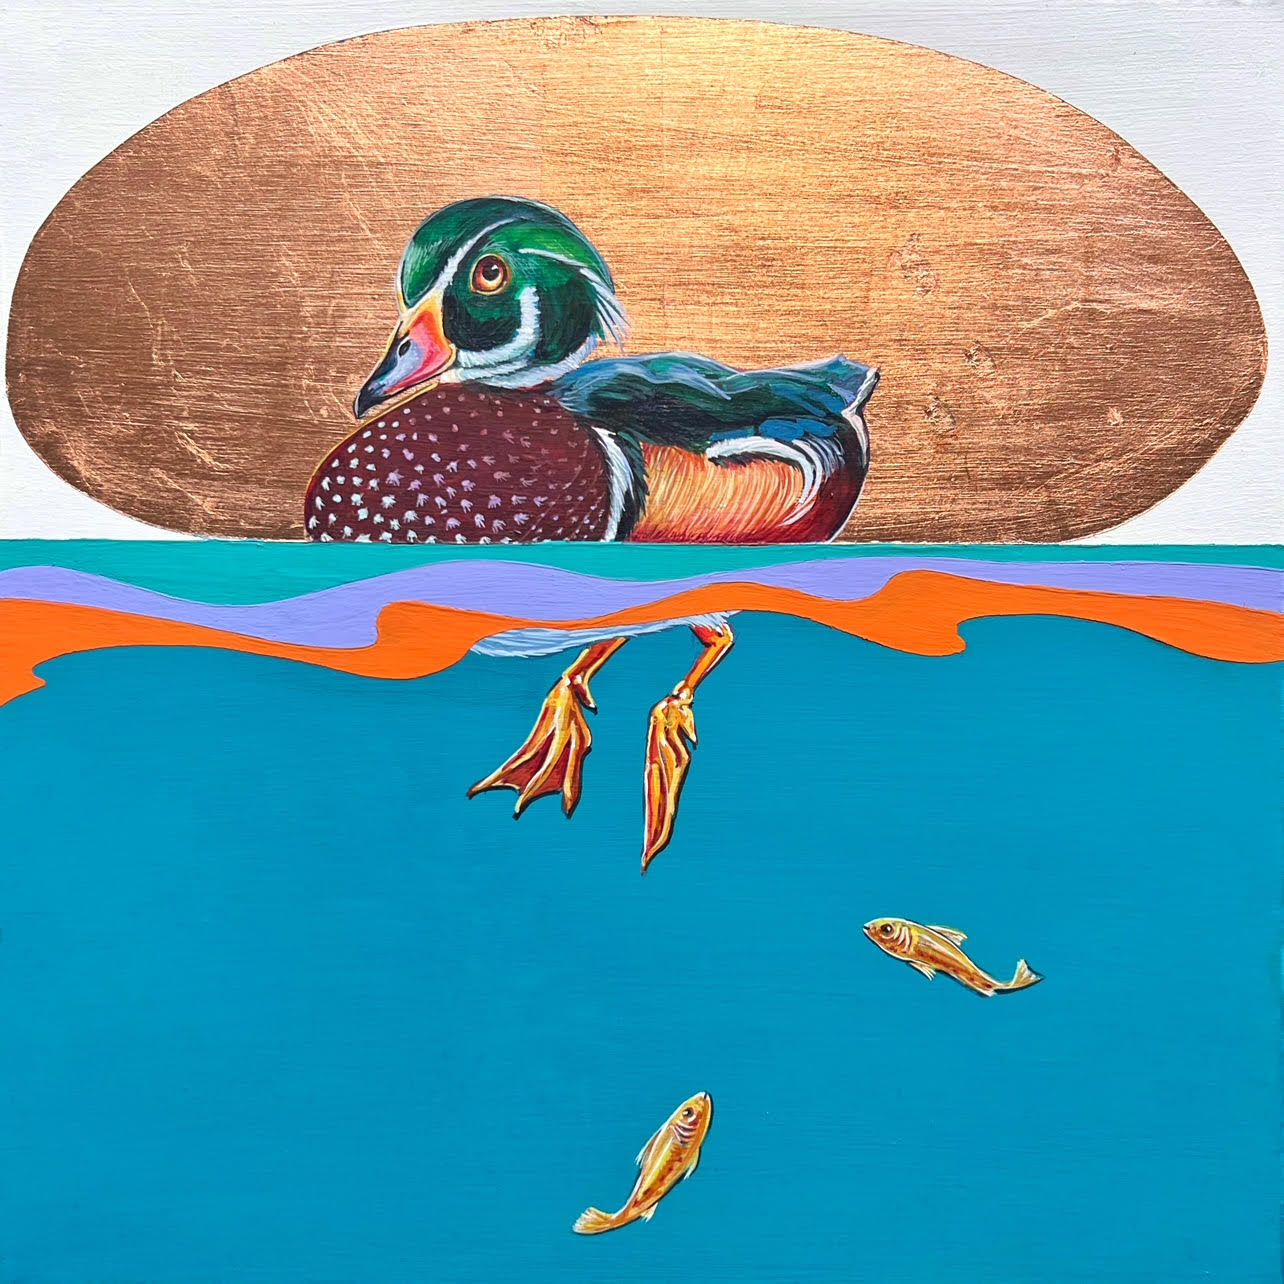 Colorful mallard duck with copper leaf background and underwater view of his dangling feet and two small fish; artist Marie Lavallee; 12"x12"